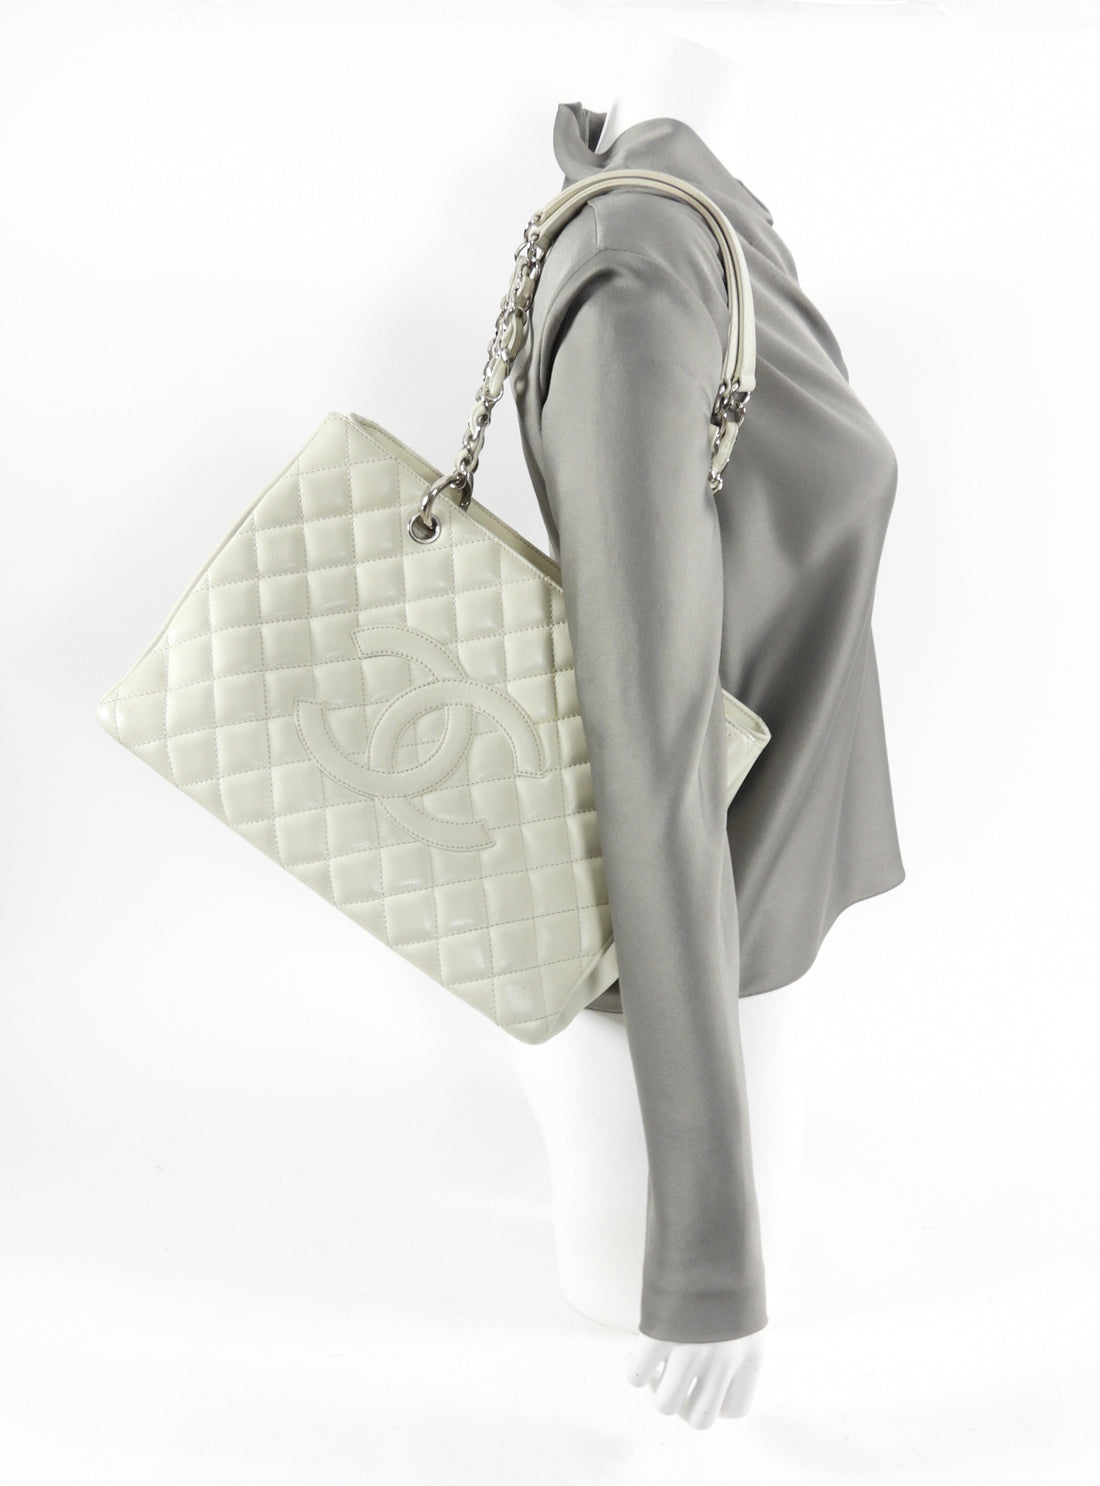 Chanel Large Ladies First Shopping Tote - White Totes, Handbags - CHA912012